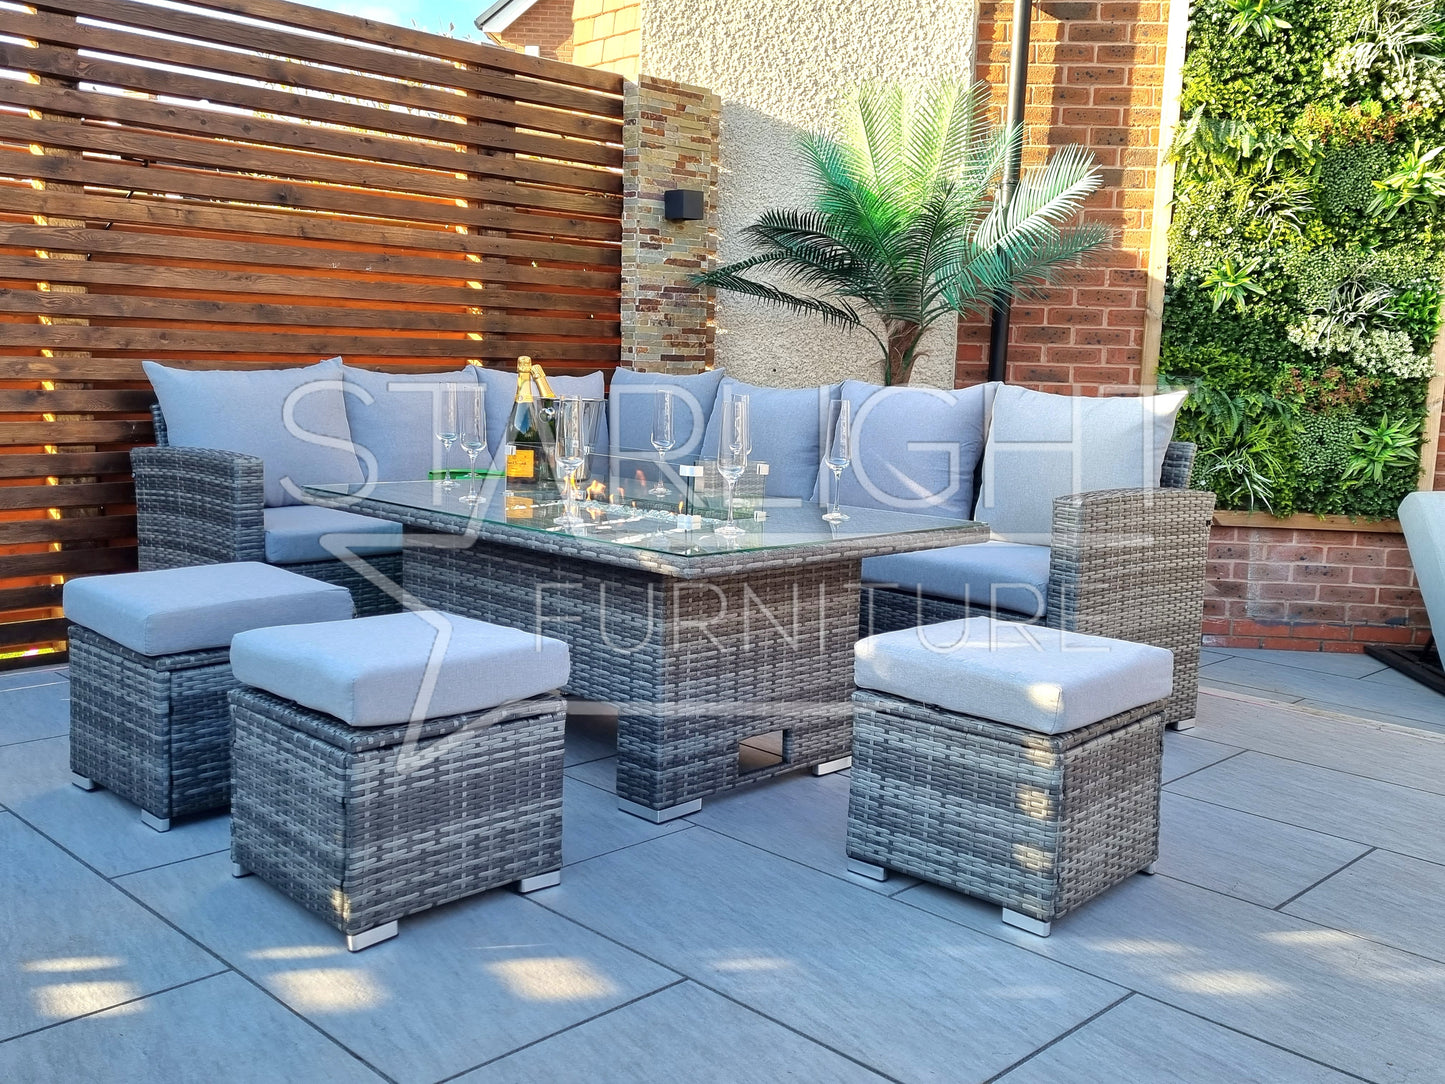 Myla 9 Seater Rattan Garden Furniture Set With FIREPIT Table